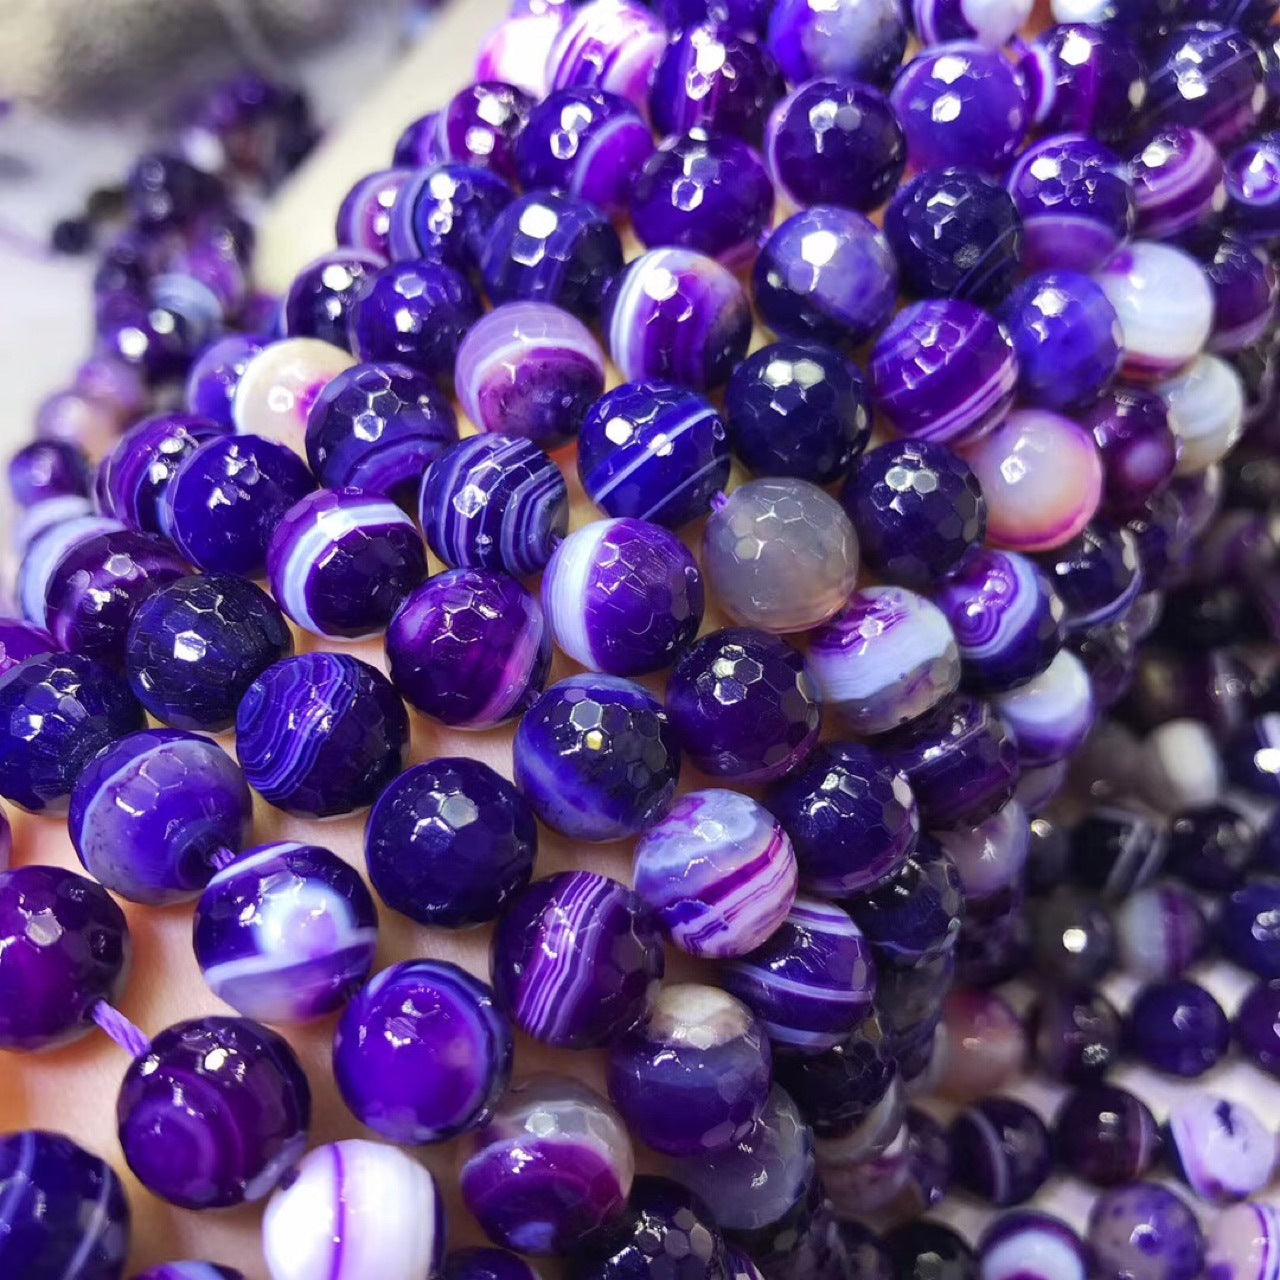 Botswana Agate Faceted Round Beads 128 Facets 10mm